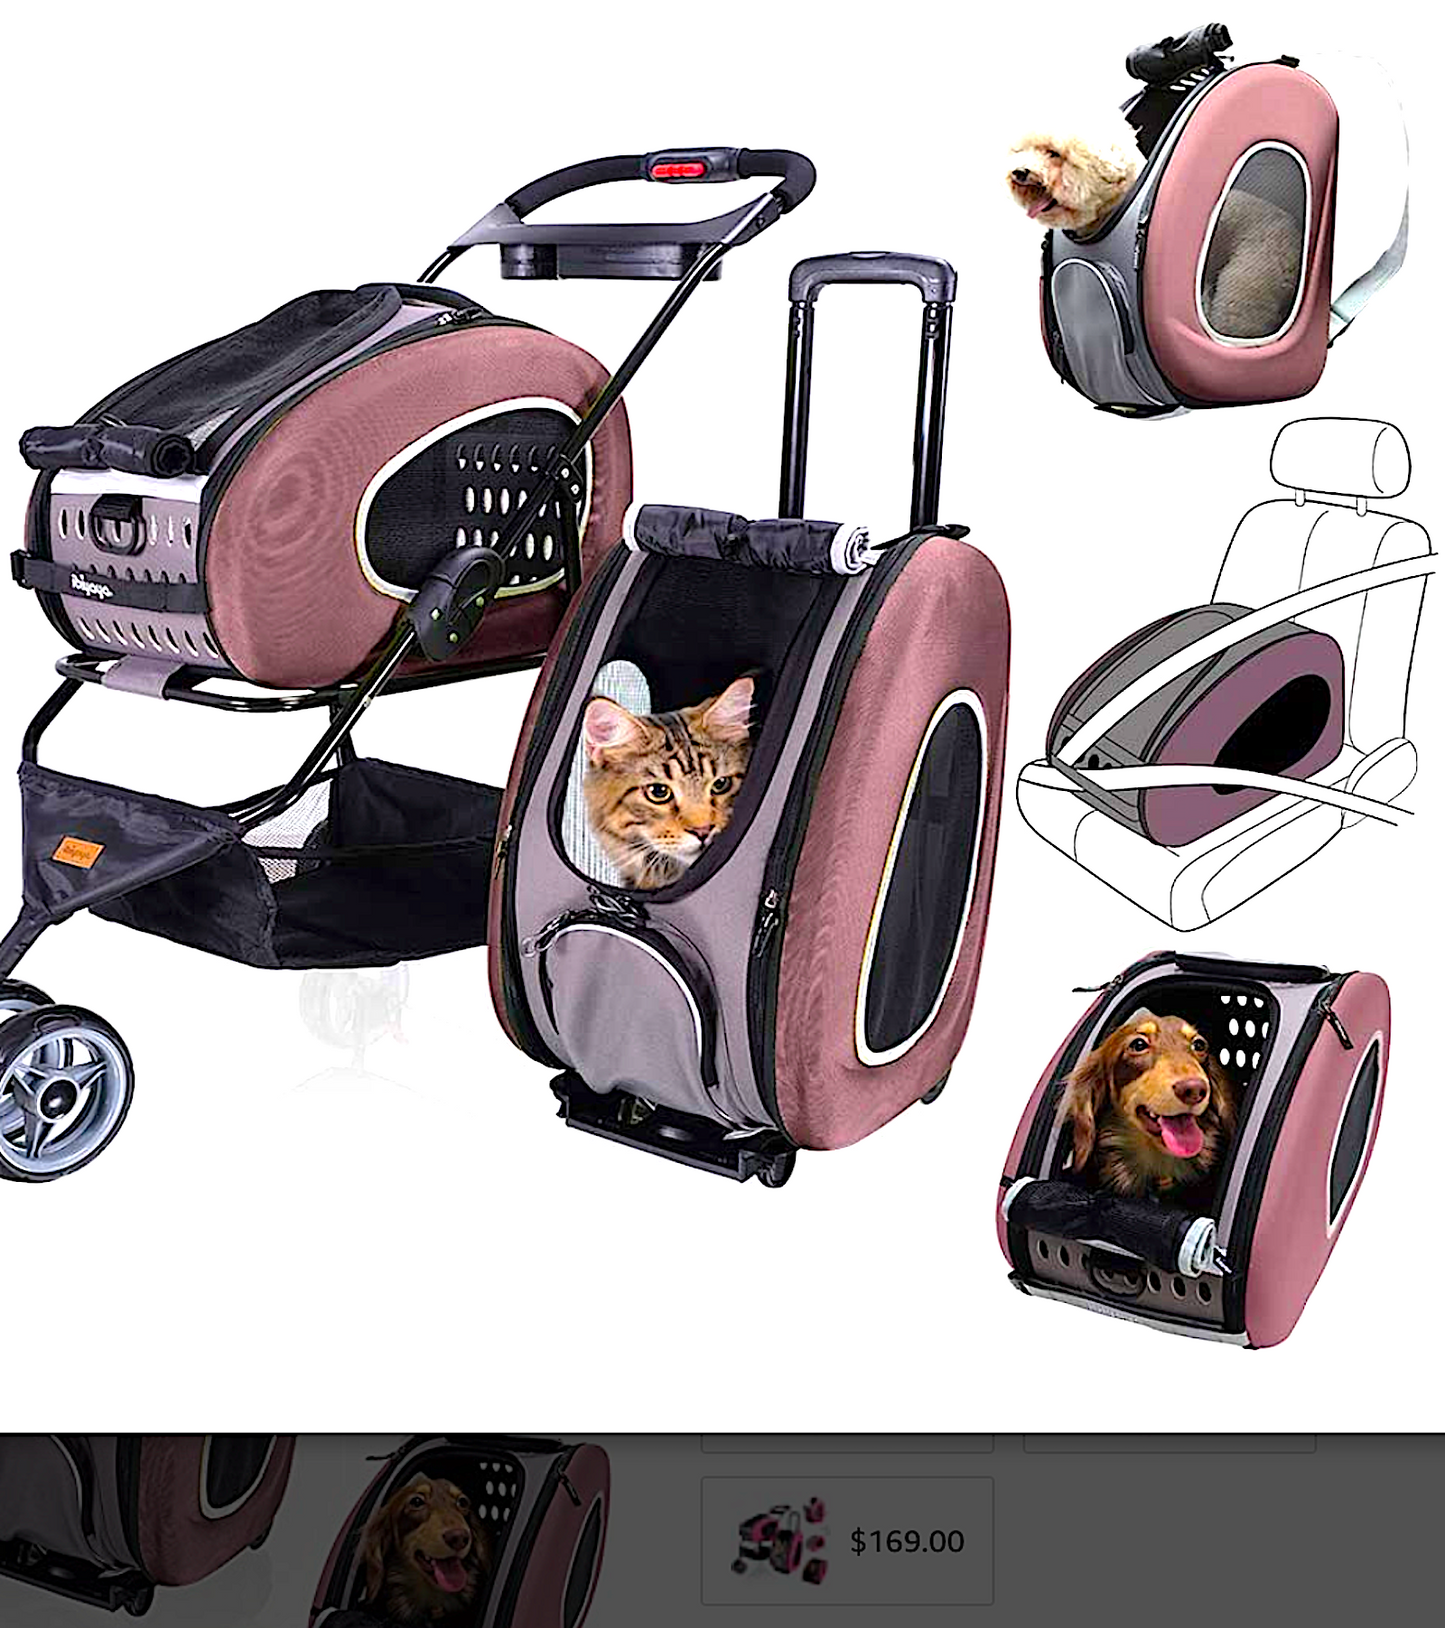 IBIYAYA 5-IN-1 PET CARRIER SYSTEM: stroller, backpack, car seat and more